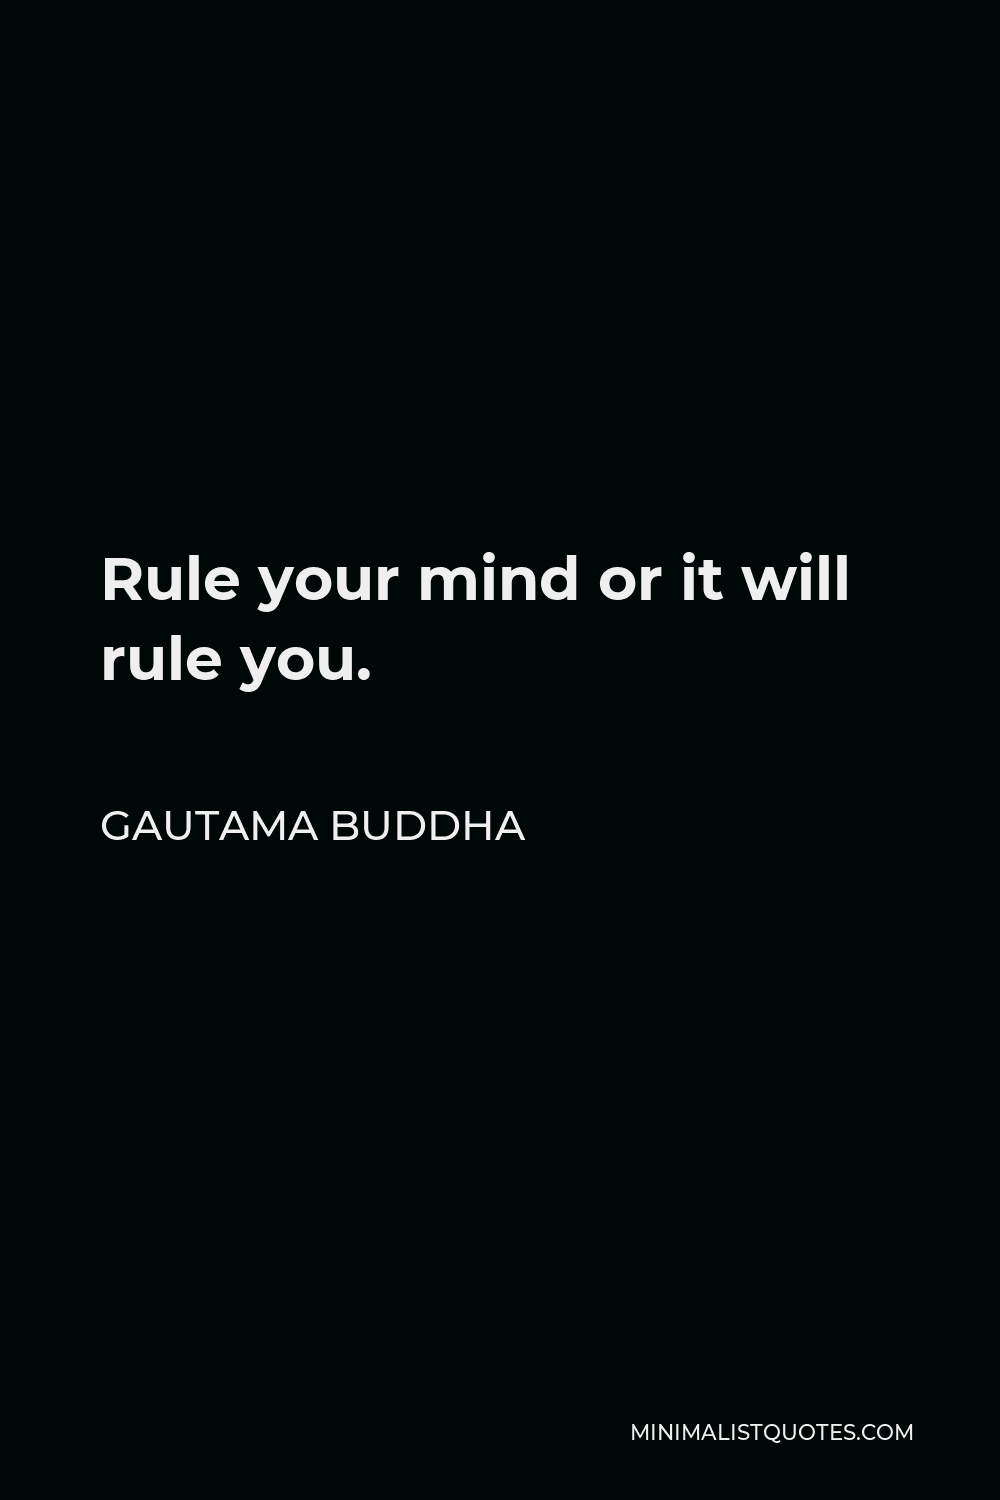 Gautama Buddha Quote - Rule your mind or it will rule you.